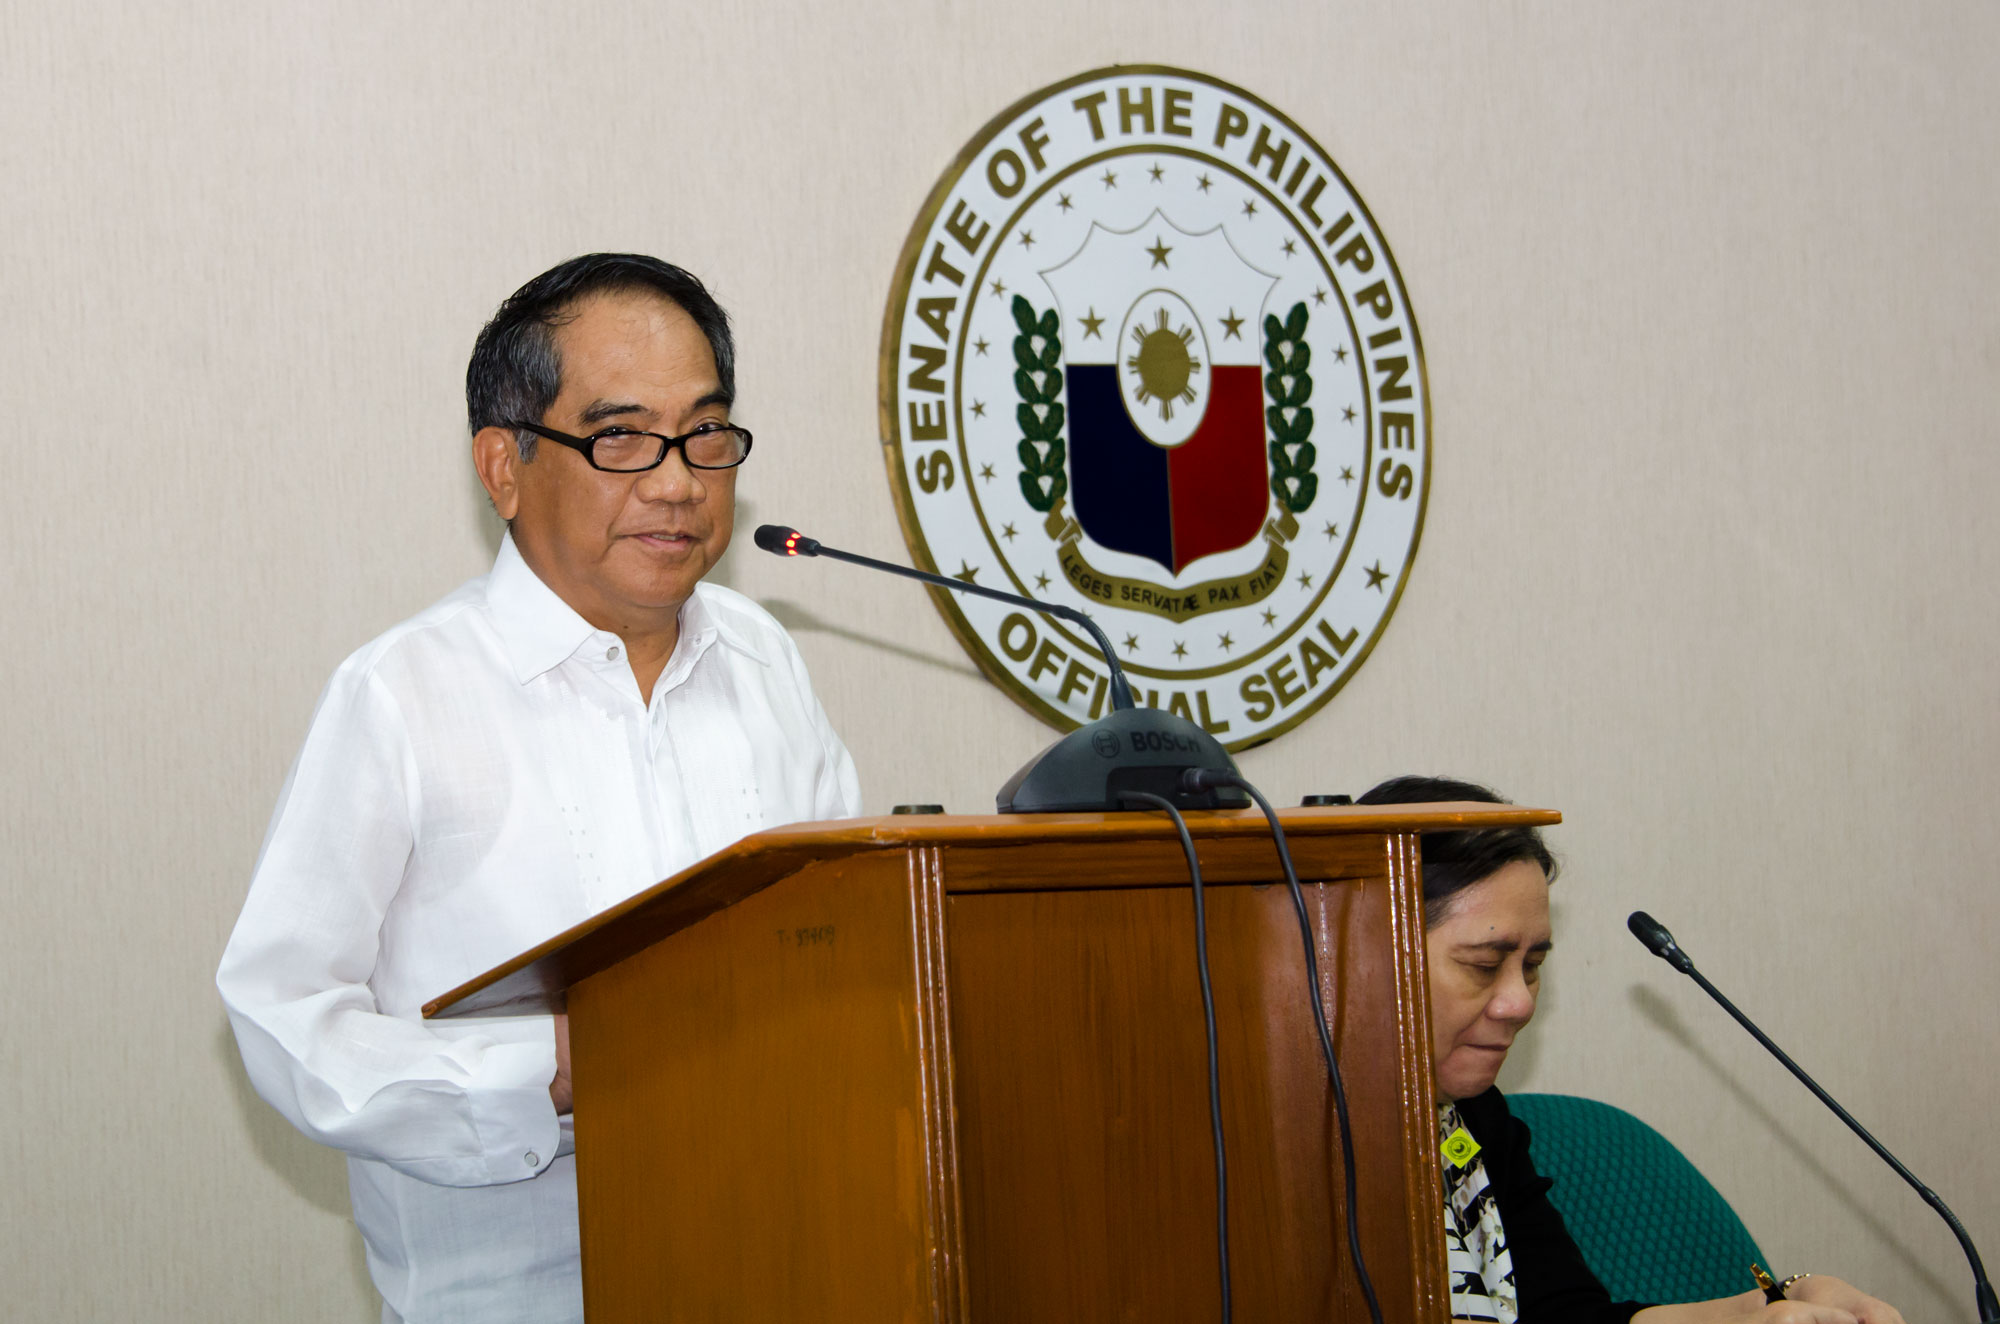 Senate Centennial Lecture Series Assessment Of The Bottom-Up Budgeting Process For FY 2015-GGM_7856.jpg